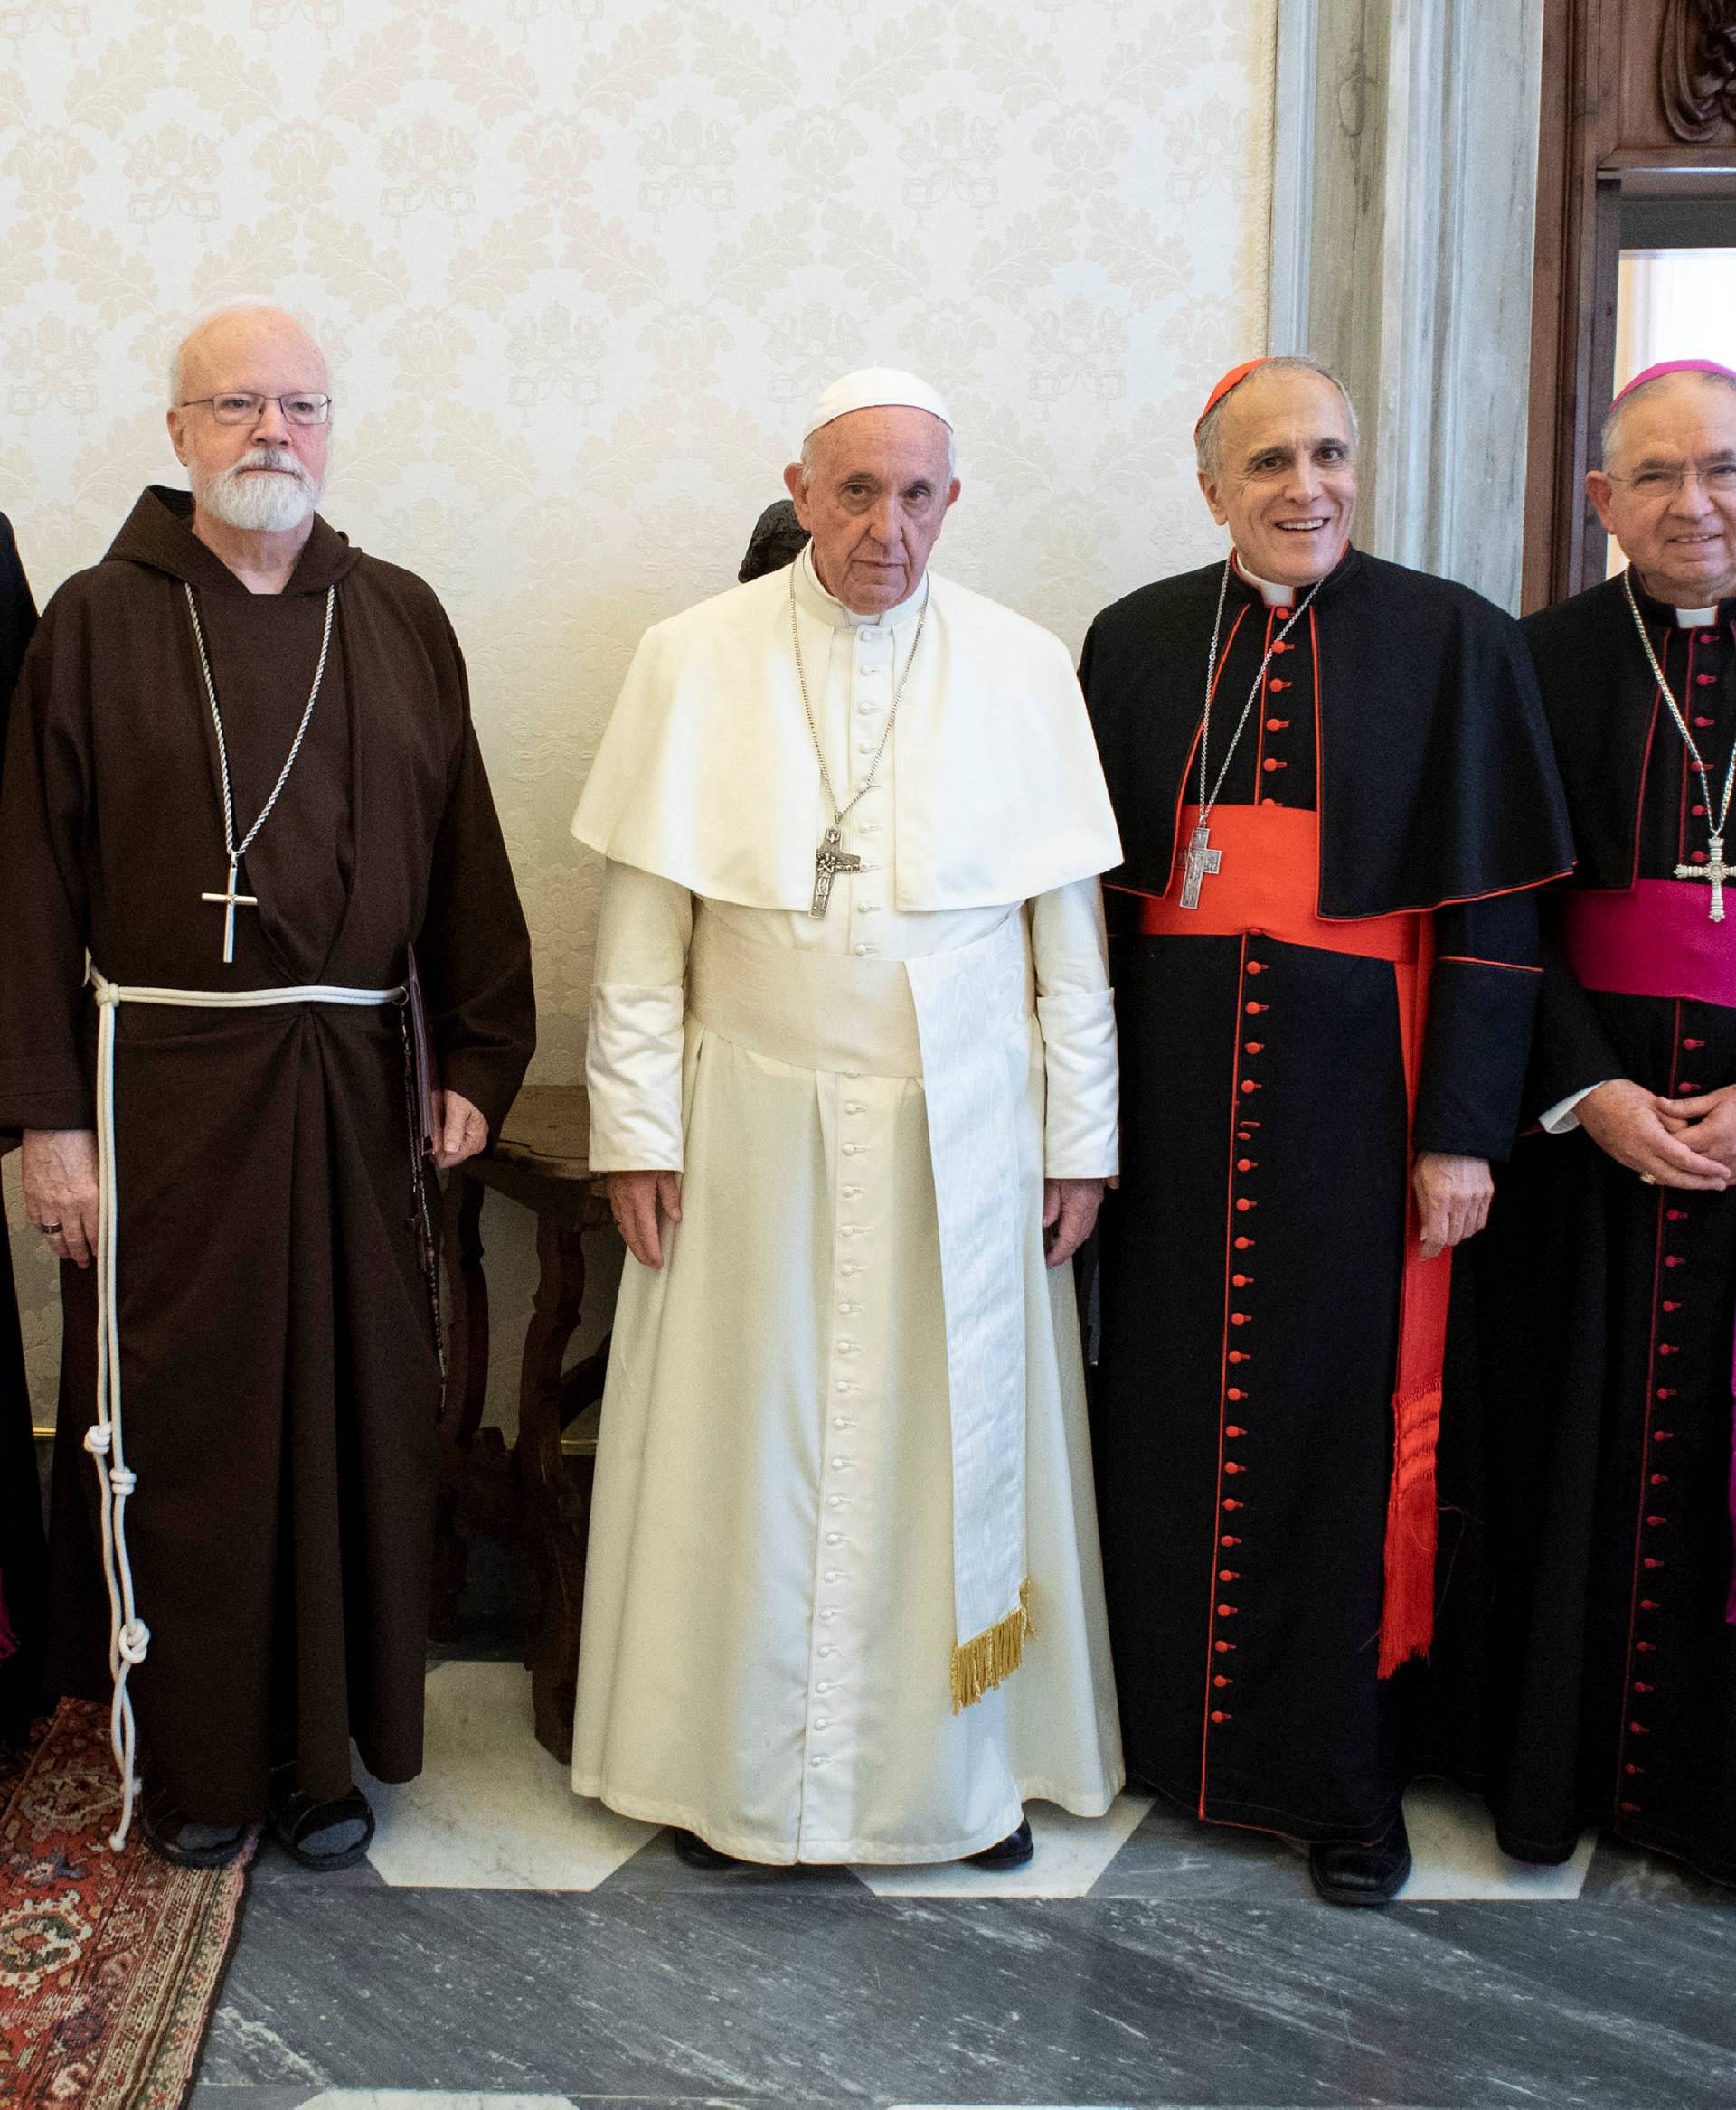 Pope Francis poses with U.S. Catholic Church leaders at the Vatican